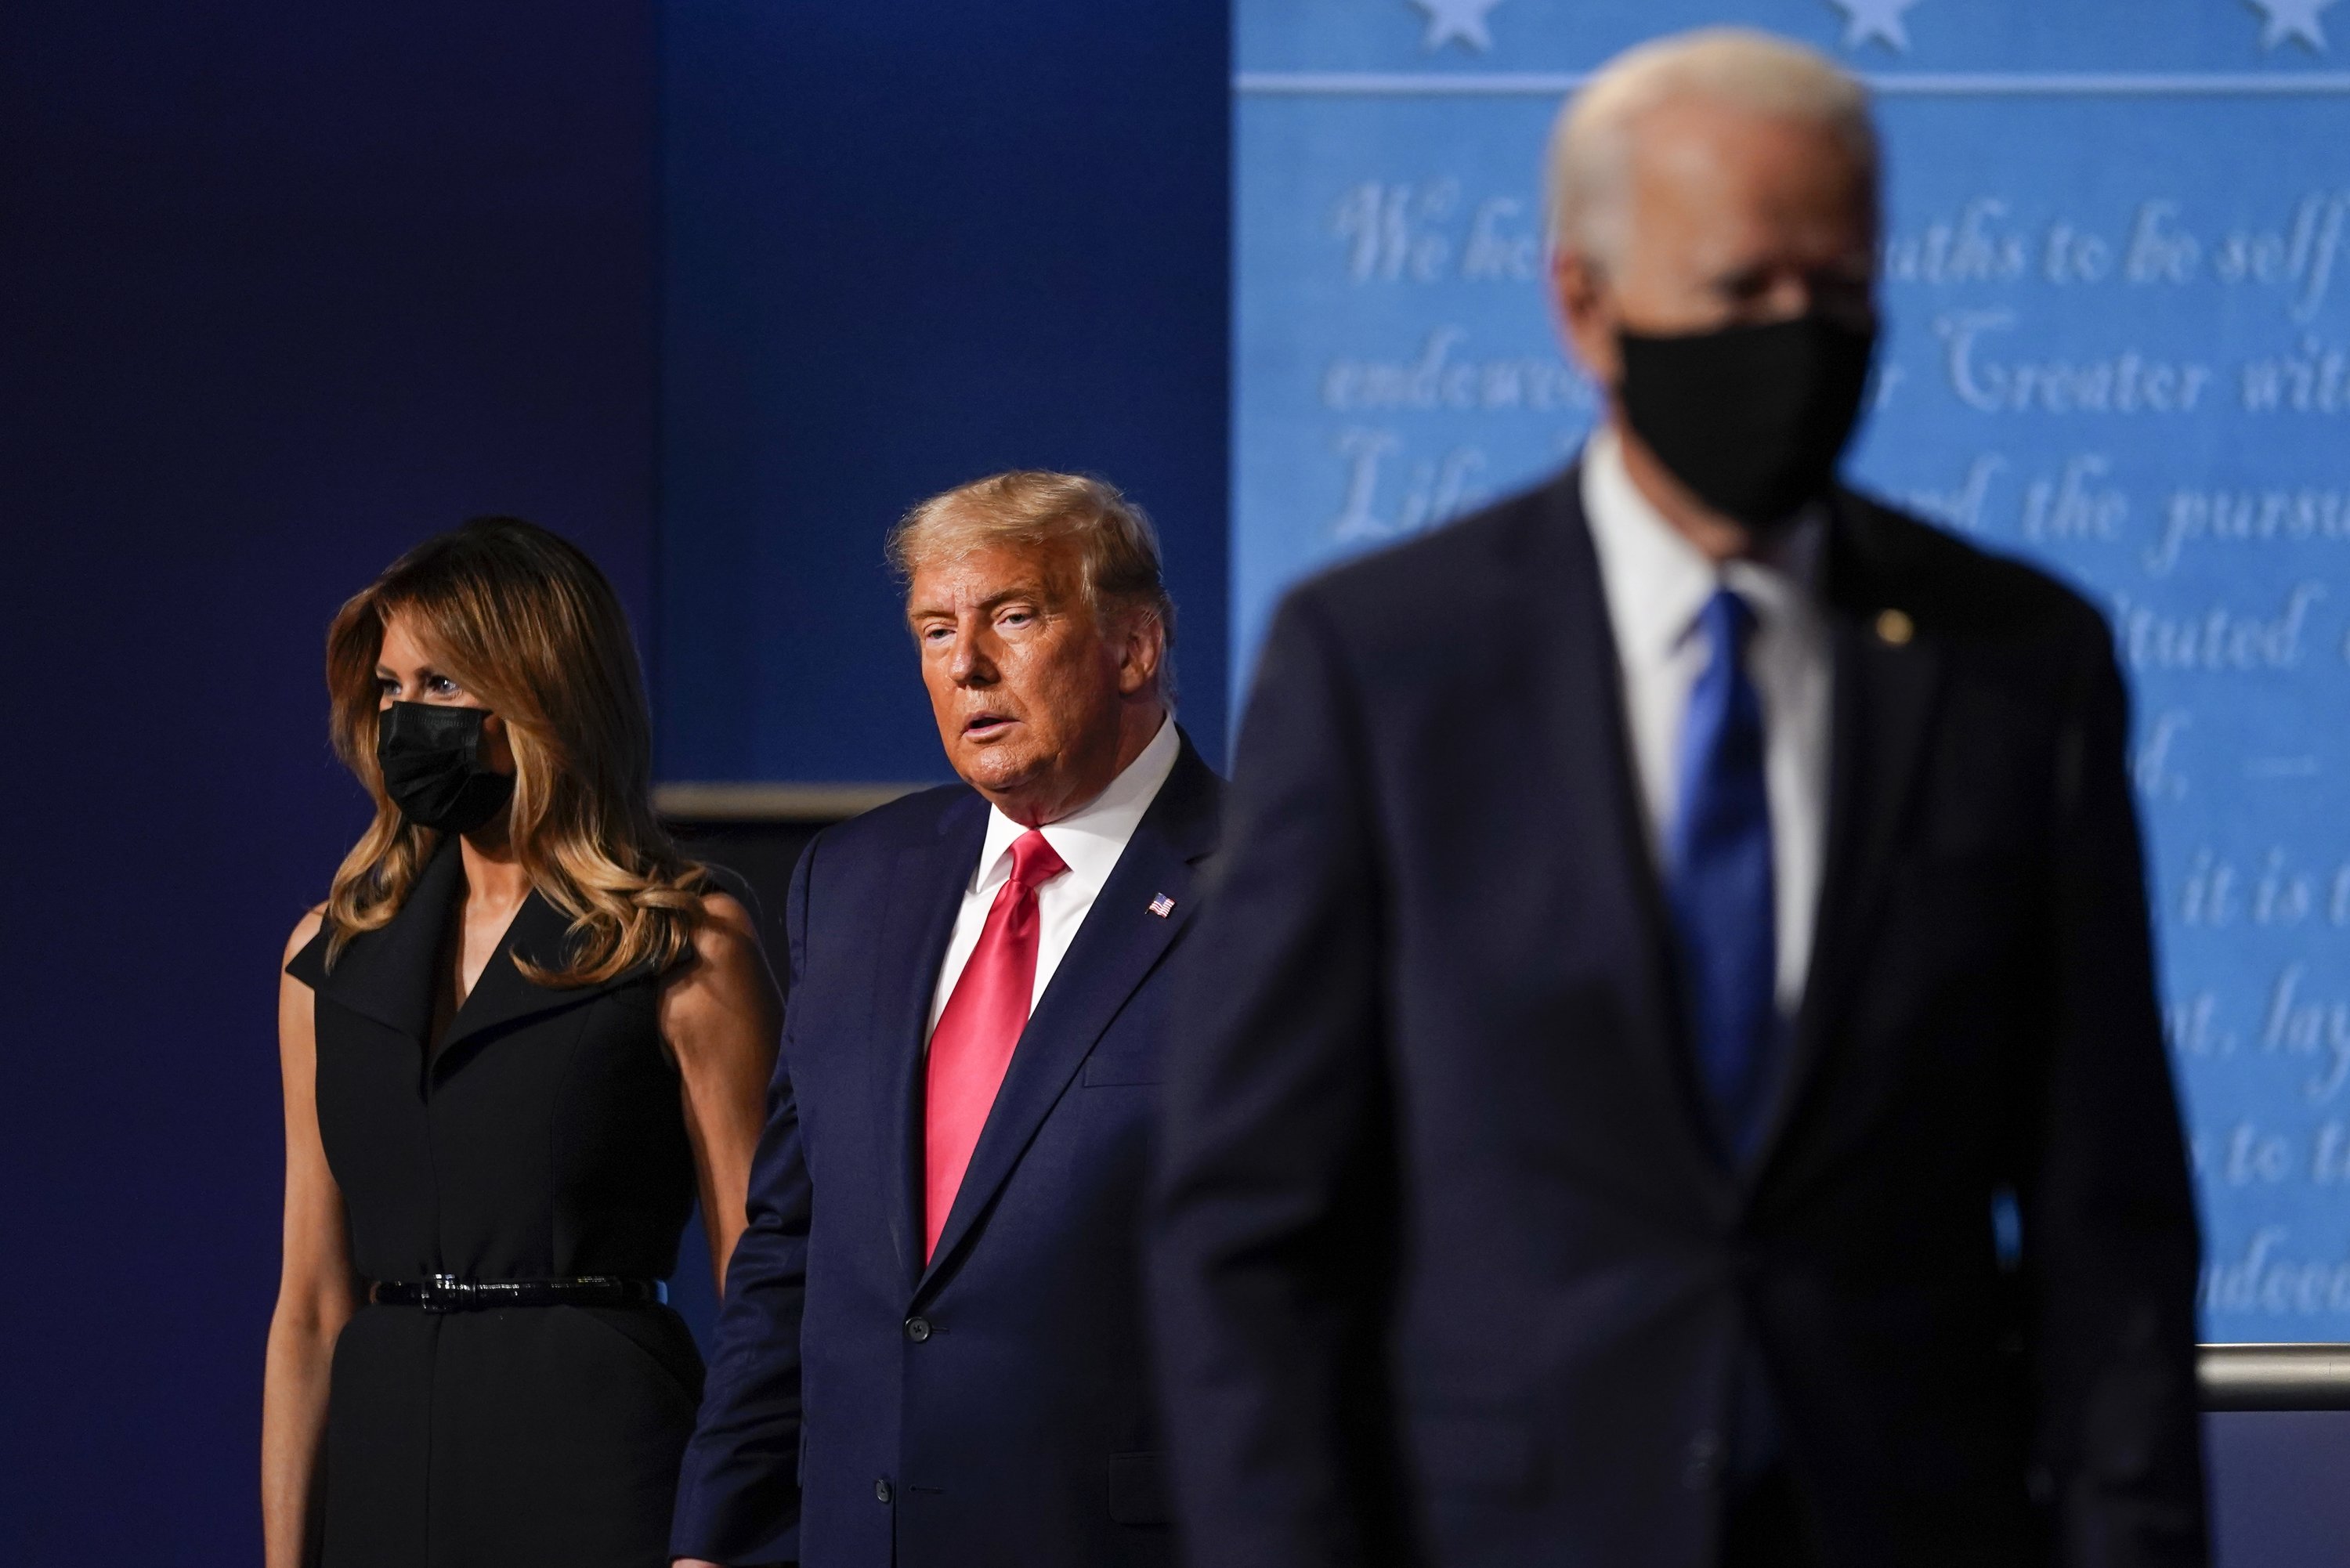 First lady Melania Trump, left, and President Donald Trump, center, remain on stage as Democratic presidential candidate former Vice President Joe Biden, right, walks away at the conclusion of the second and final presidential debate Thursday, Oct. 22, 2020, at Belmont University in Nashville, Tenn. (AP Photo/Julio Cortez)